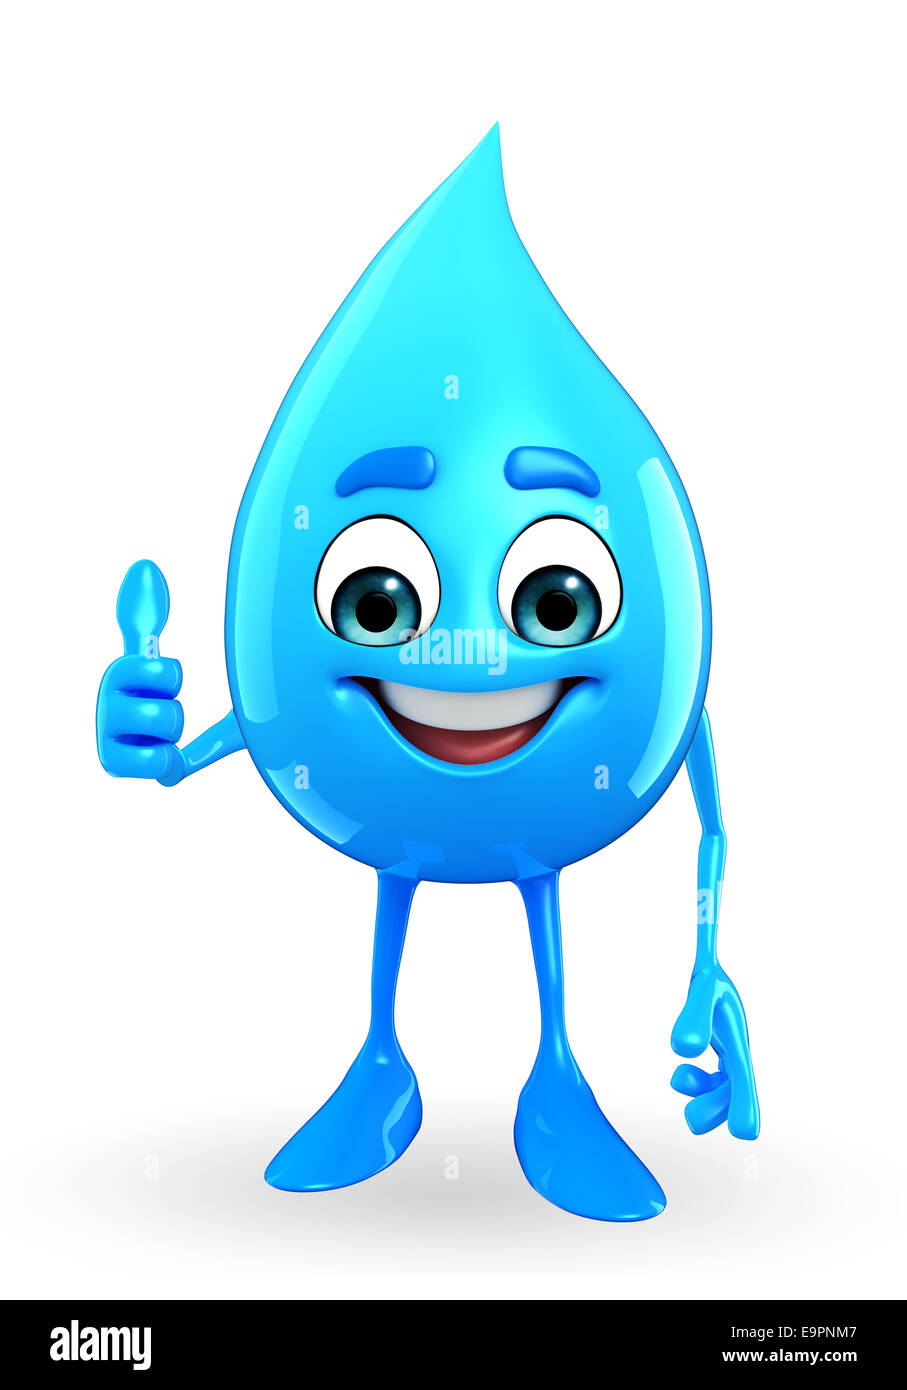 Cartoon Character Of Water Drop is thumbs up Stock Photo